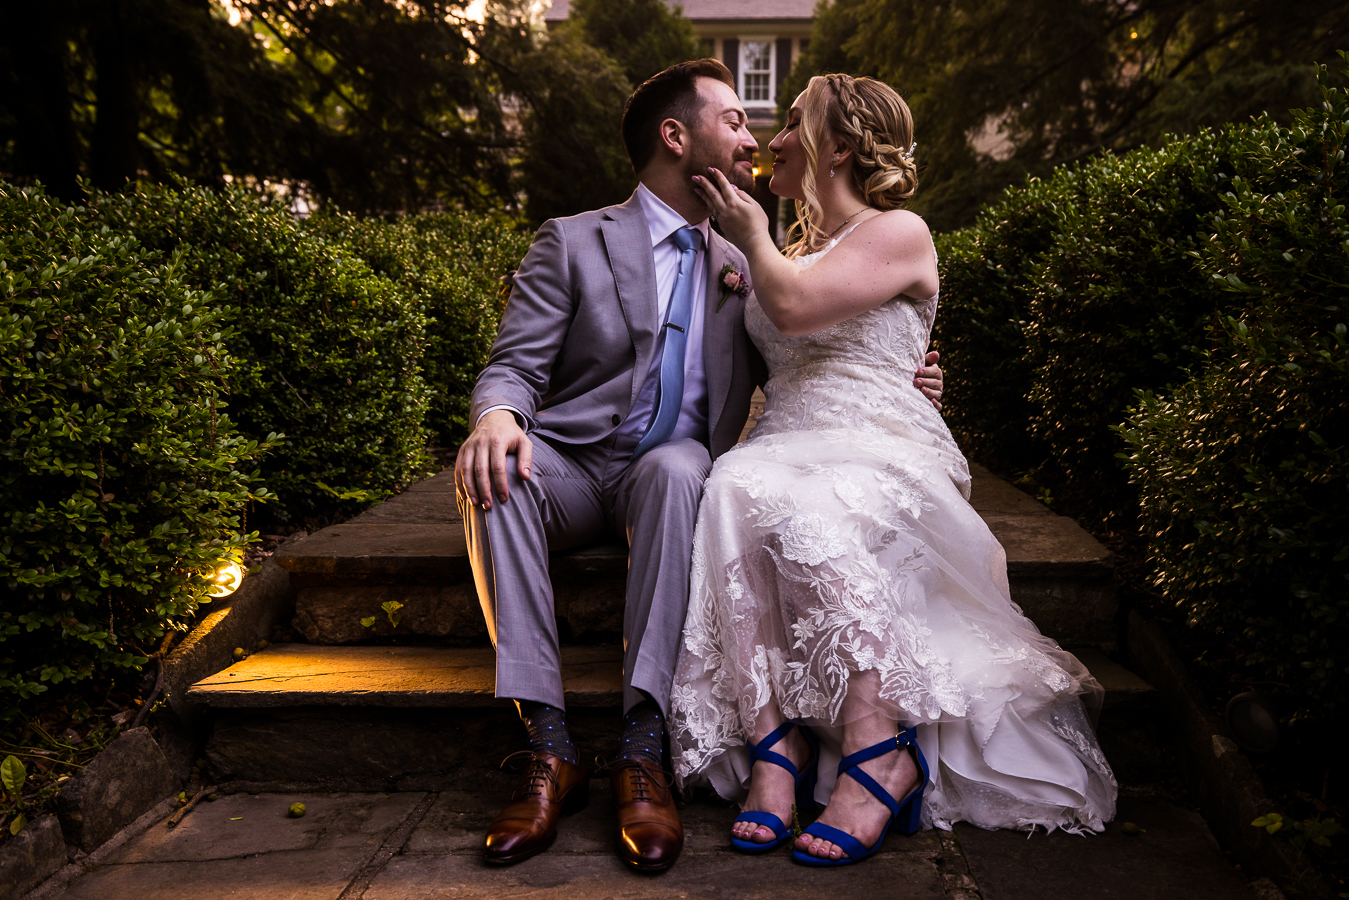 Holly Hedge Estate Wedding Photographer, lisa rhinehart, captures this fun, loving image of the bride and groom as they sit together on the stone walkway smiling at one another after their wedding ceremony 